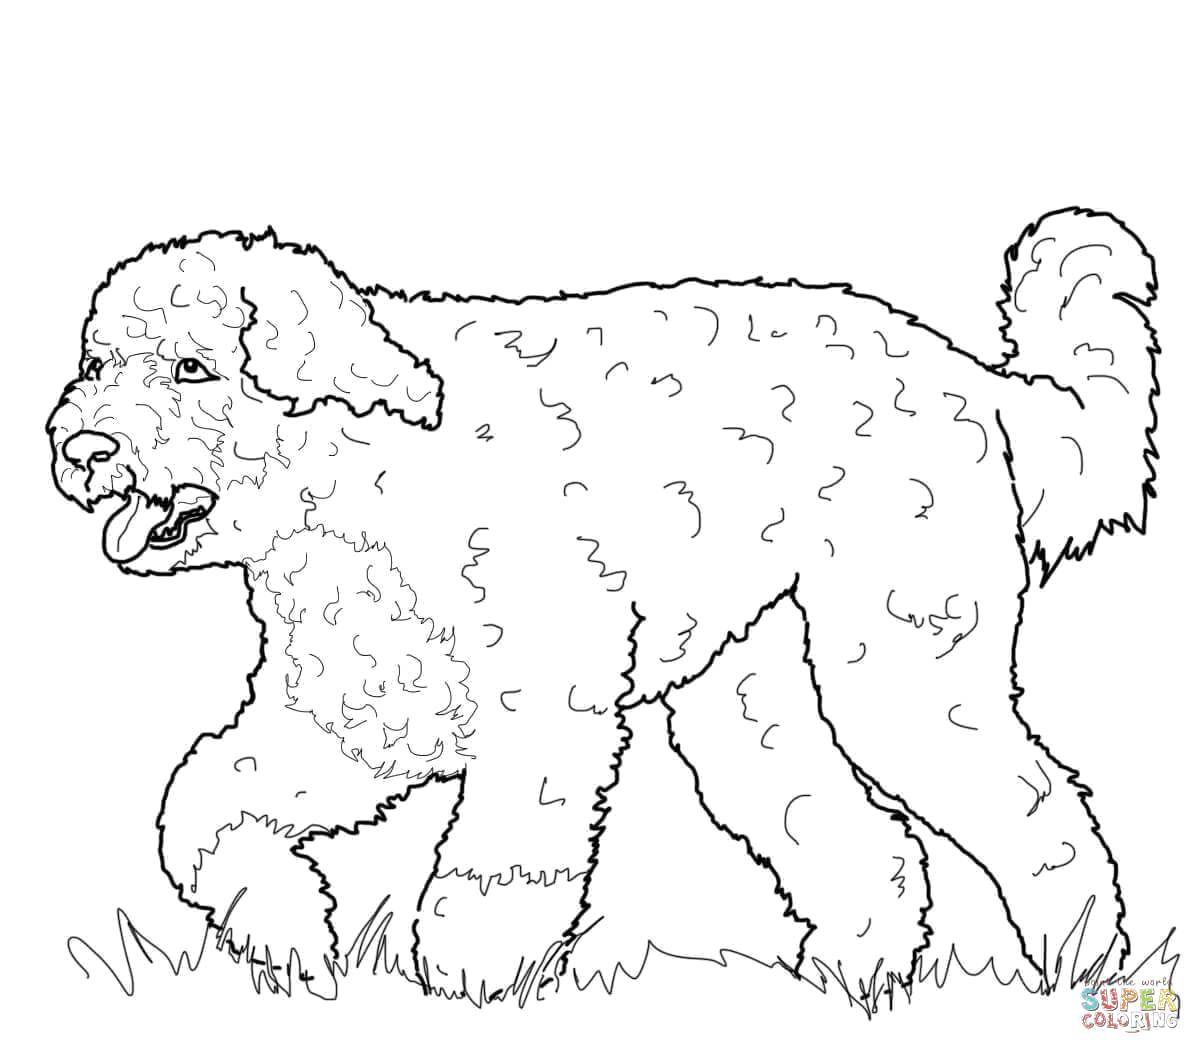 Coloring Fluffy dog. Category Animals. Tags:  Animals, dog.